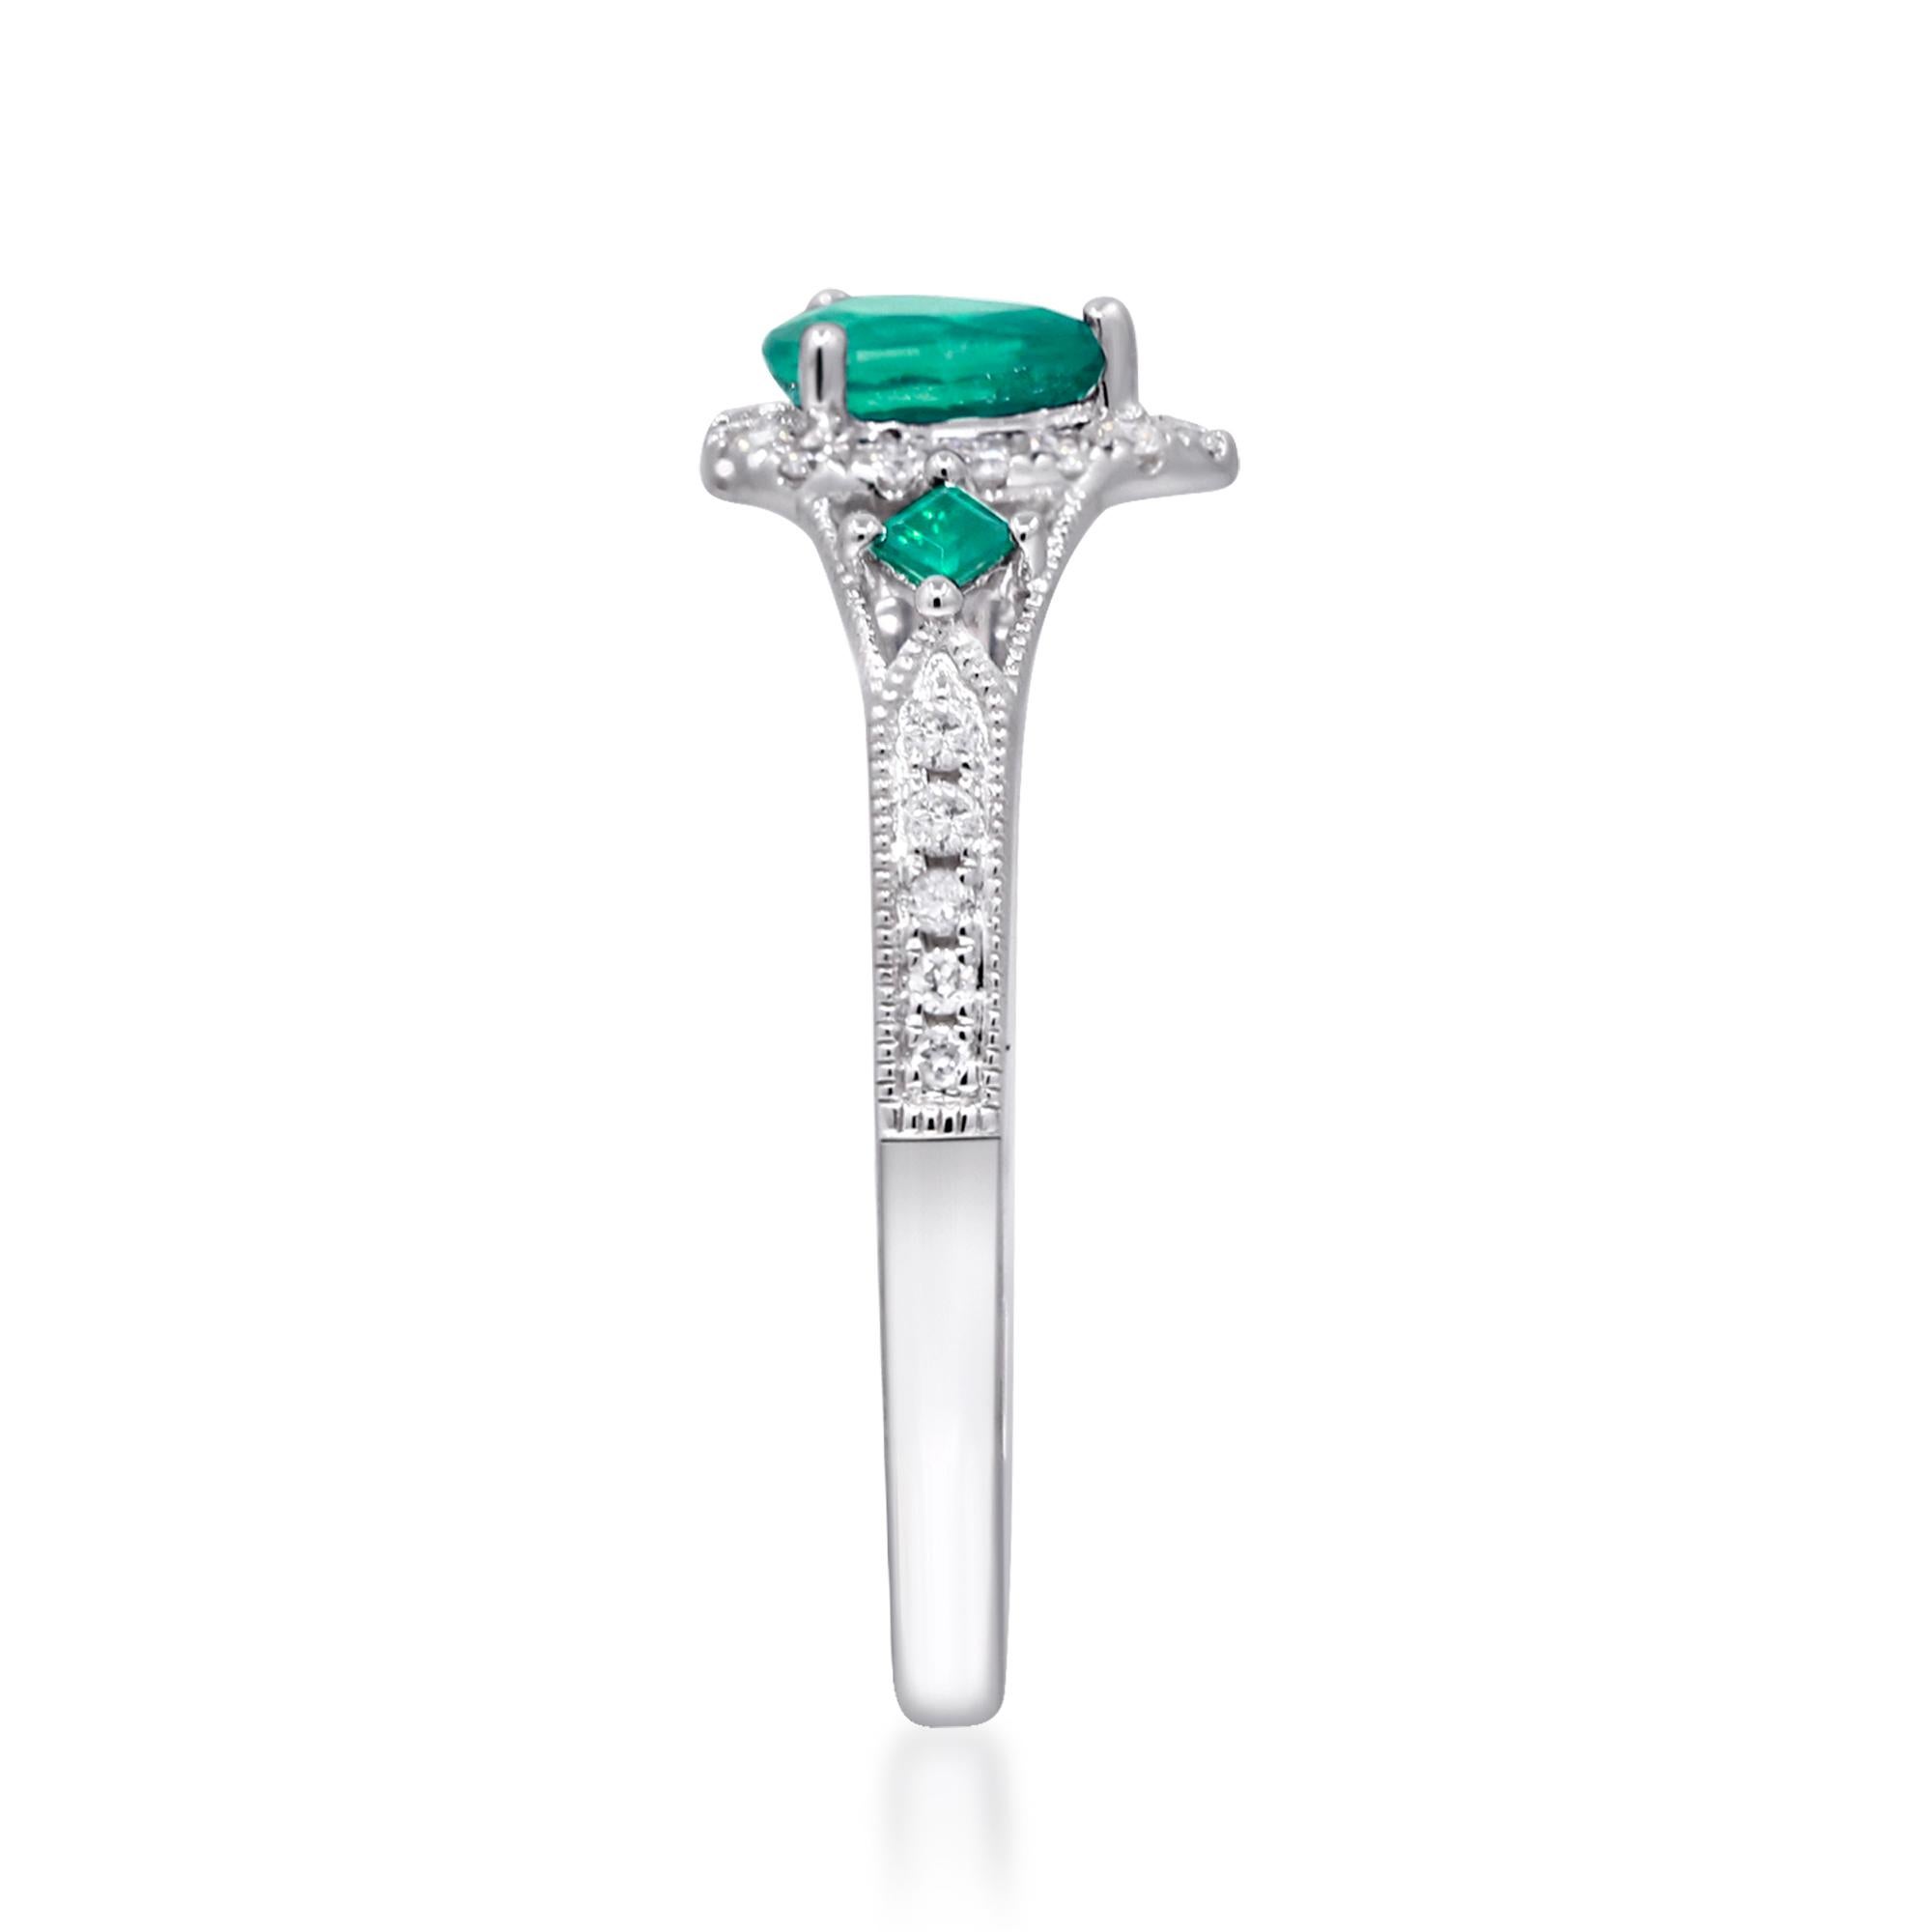 Decorate yourself in elegance with this Ring is crafted from 14-karat White Gold by Gin & Grace. This Ring is made up of 6x4 mm Pear-Cut Emerald (1 pcs) 0.32 carat, 2.0 mm Square-cut Emerald (2 pcs) 0.10 carat and Round-cut White Diamond (24 Pcs)